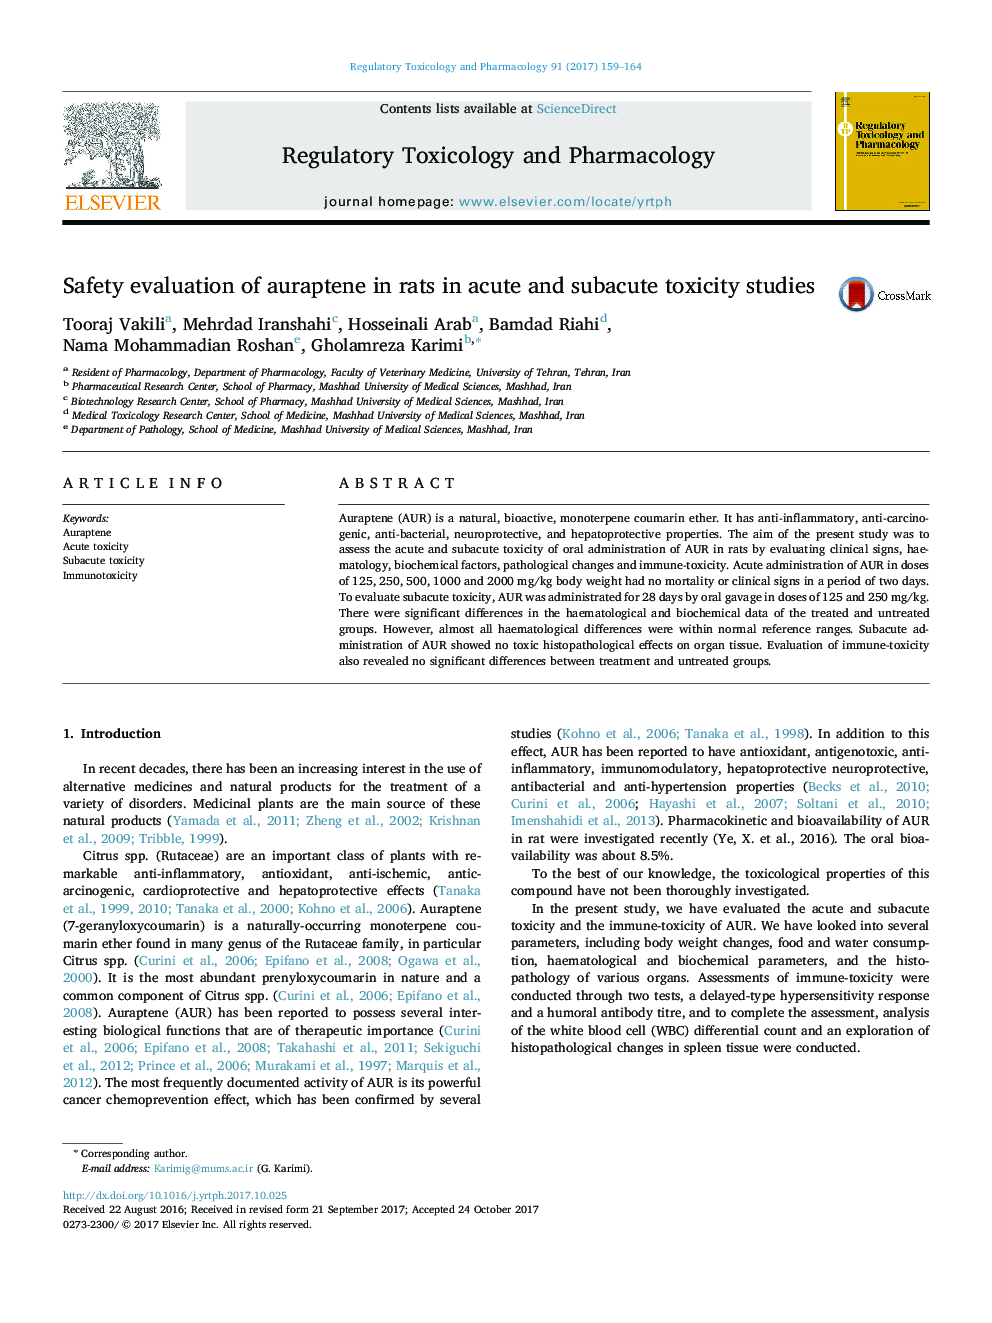 Safety evaluation of auraptene in rats in acute and subacute toxicity studies